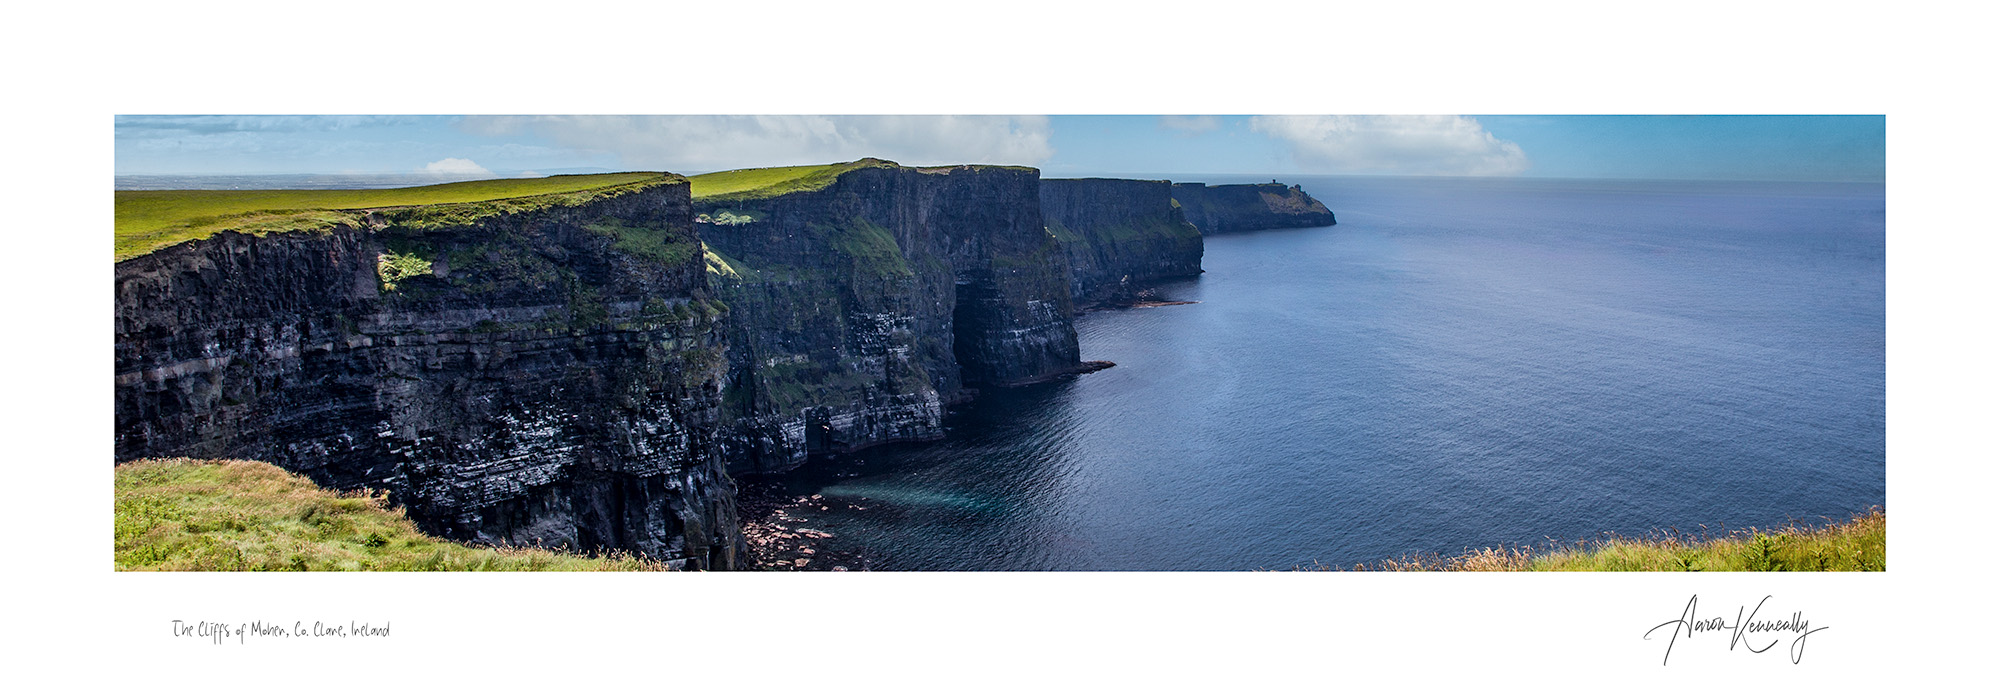 The Cliffs of Moher, Co. Clare, Ireland